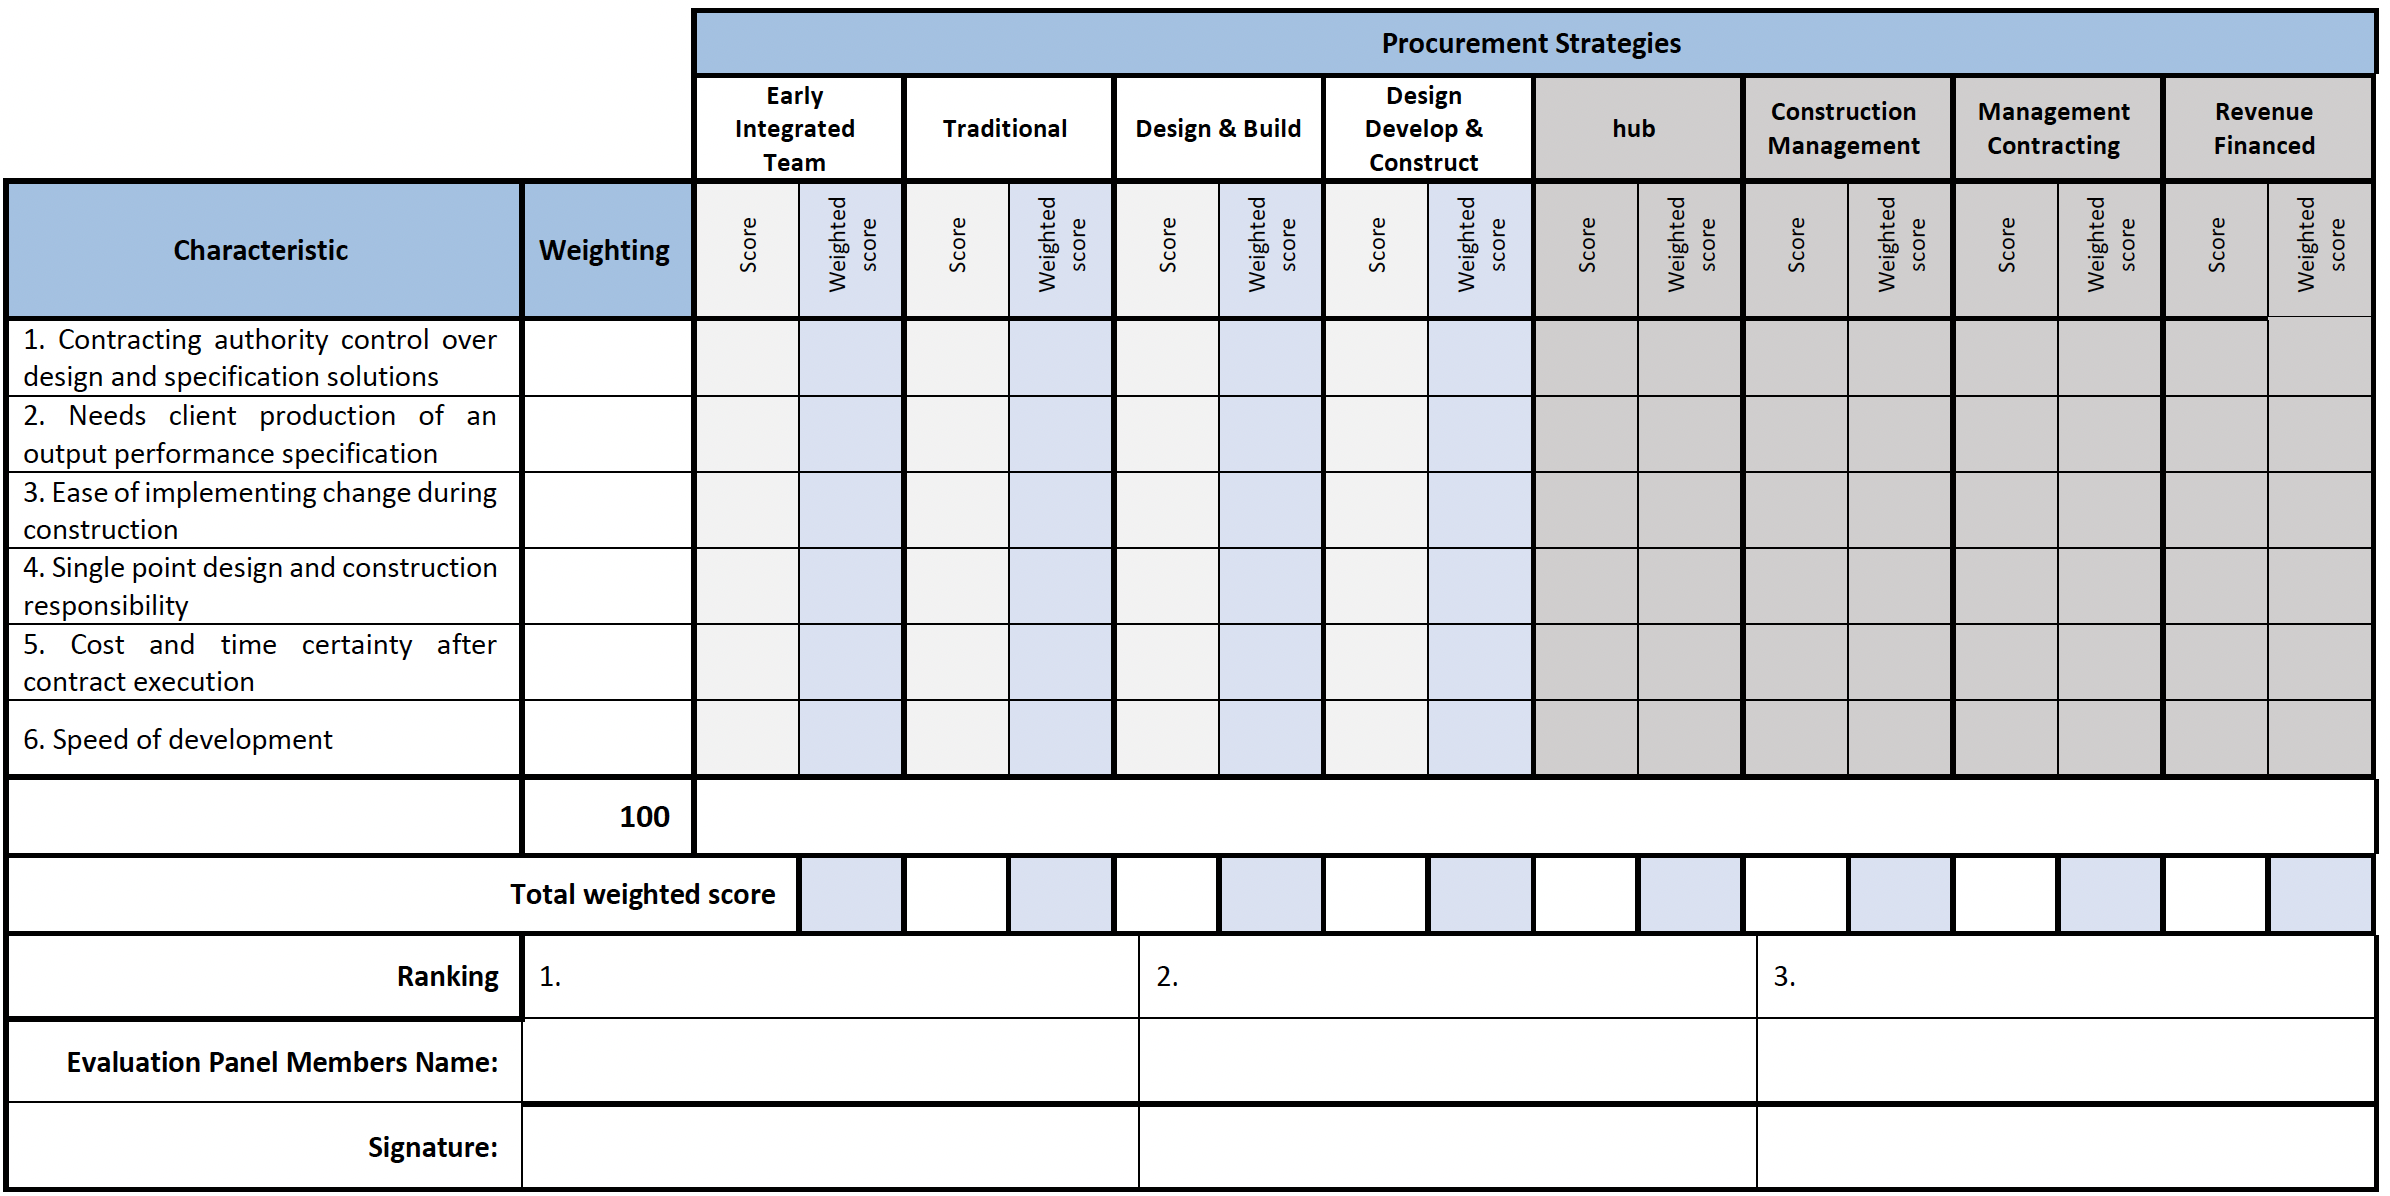 Example of a weighted scoring for assessment of procurement strategies